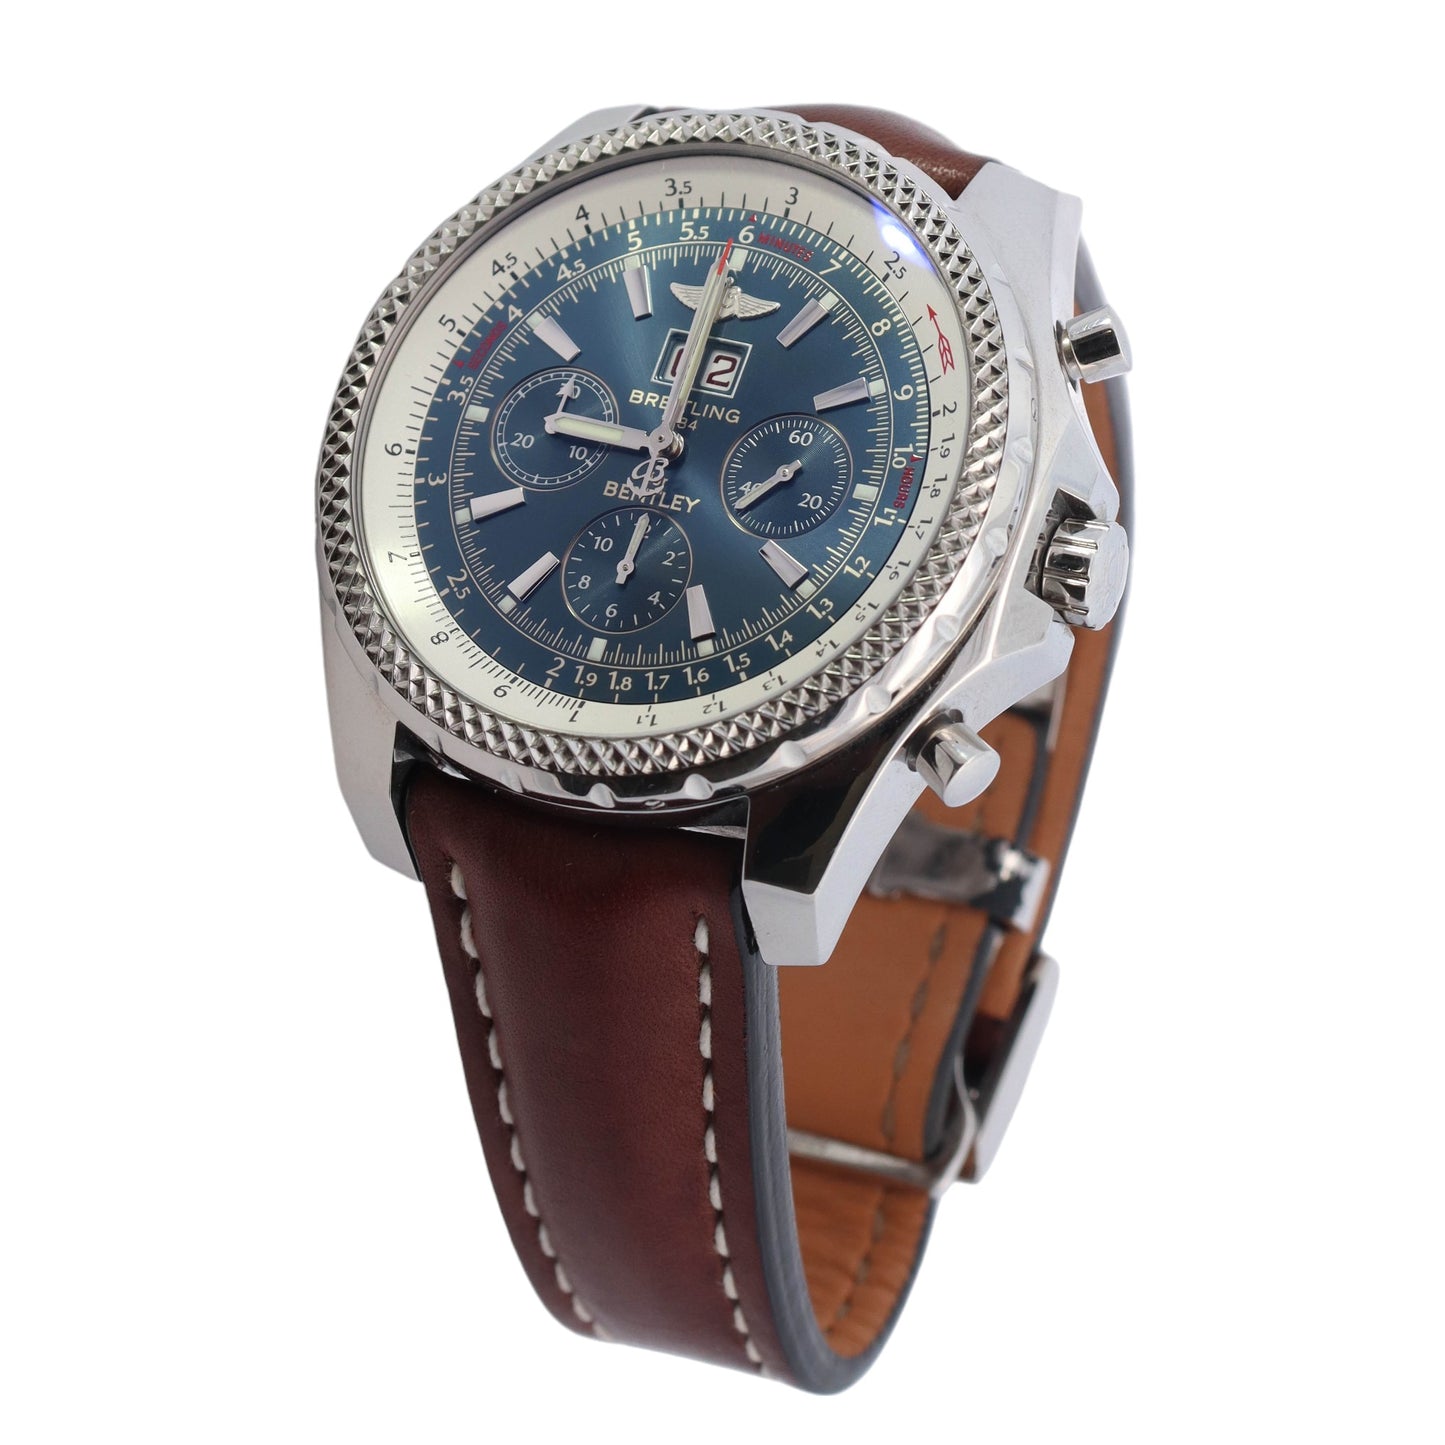 Breitling Bentley Stainless Steel 49mm Blue Chronograph Dial Watch Reference #: A4436212/C652